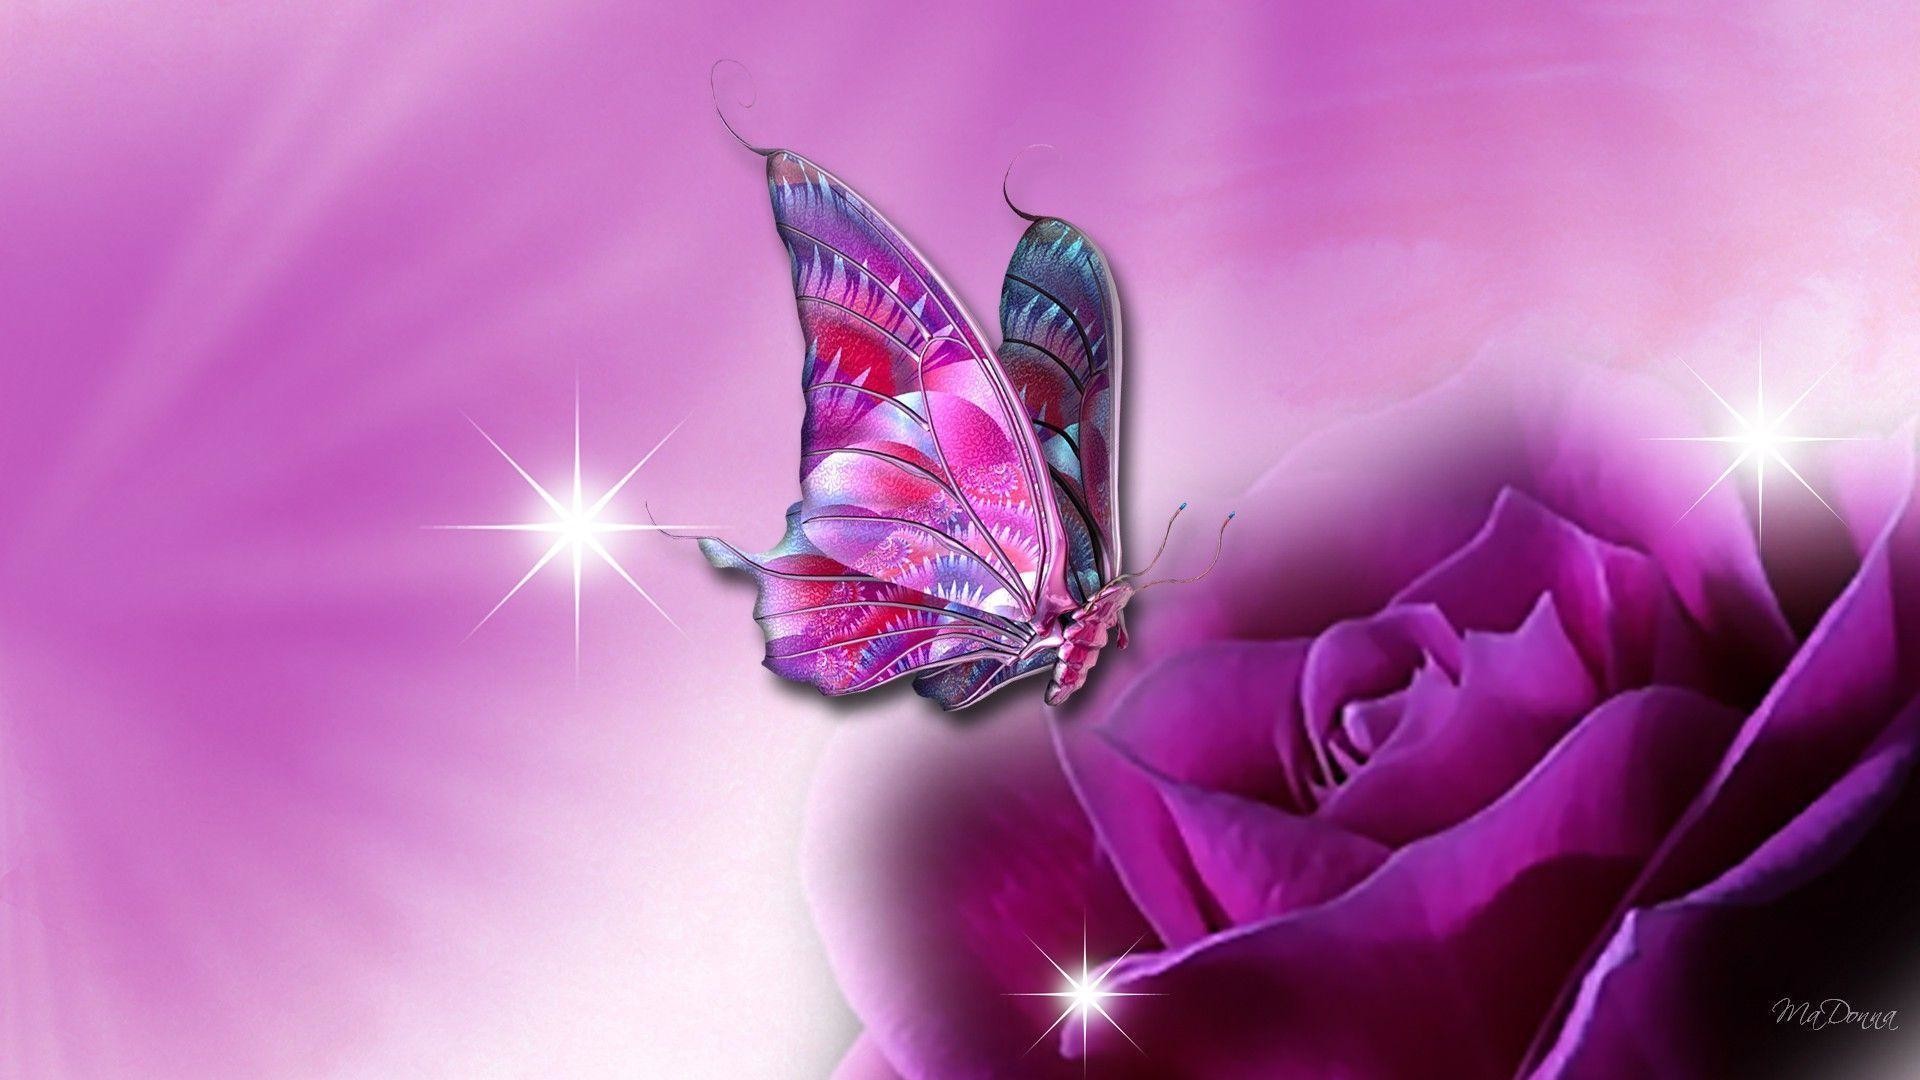 1920x1080 Download Awesome Butterfly For Laptop Wallpaper | Full HD Wallpapers